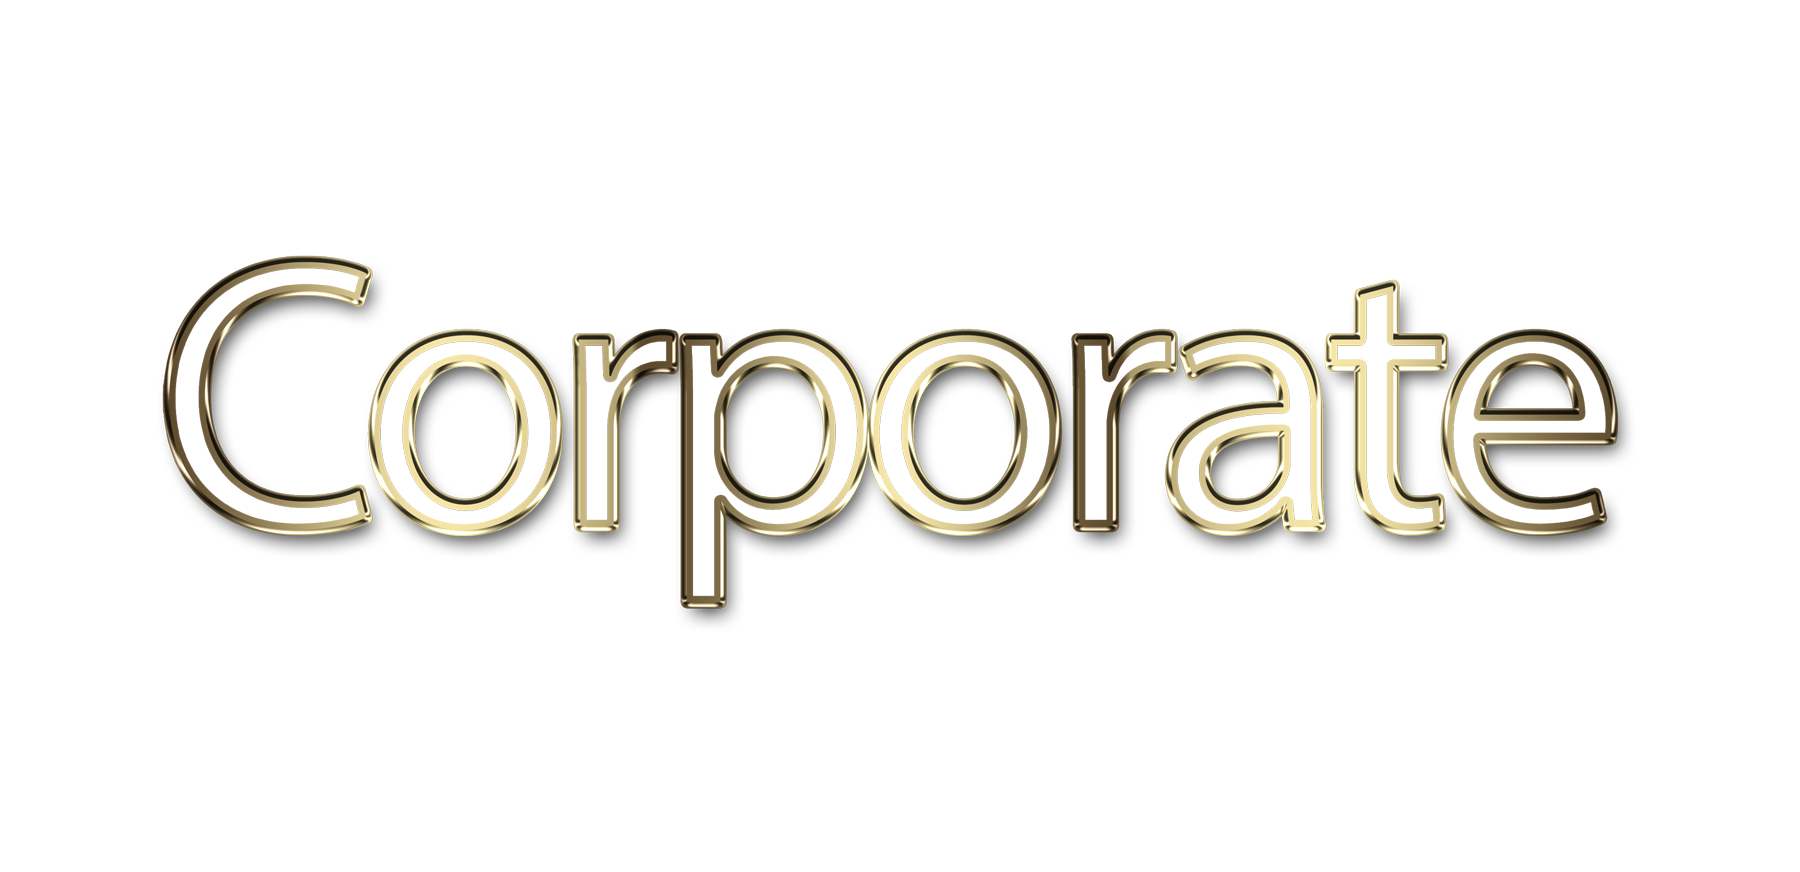 Corporate png, word Corporate png, Corporate word png, Corporate text png, Corporate letters png, Corporate word art typography PNG images, transparent png